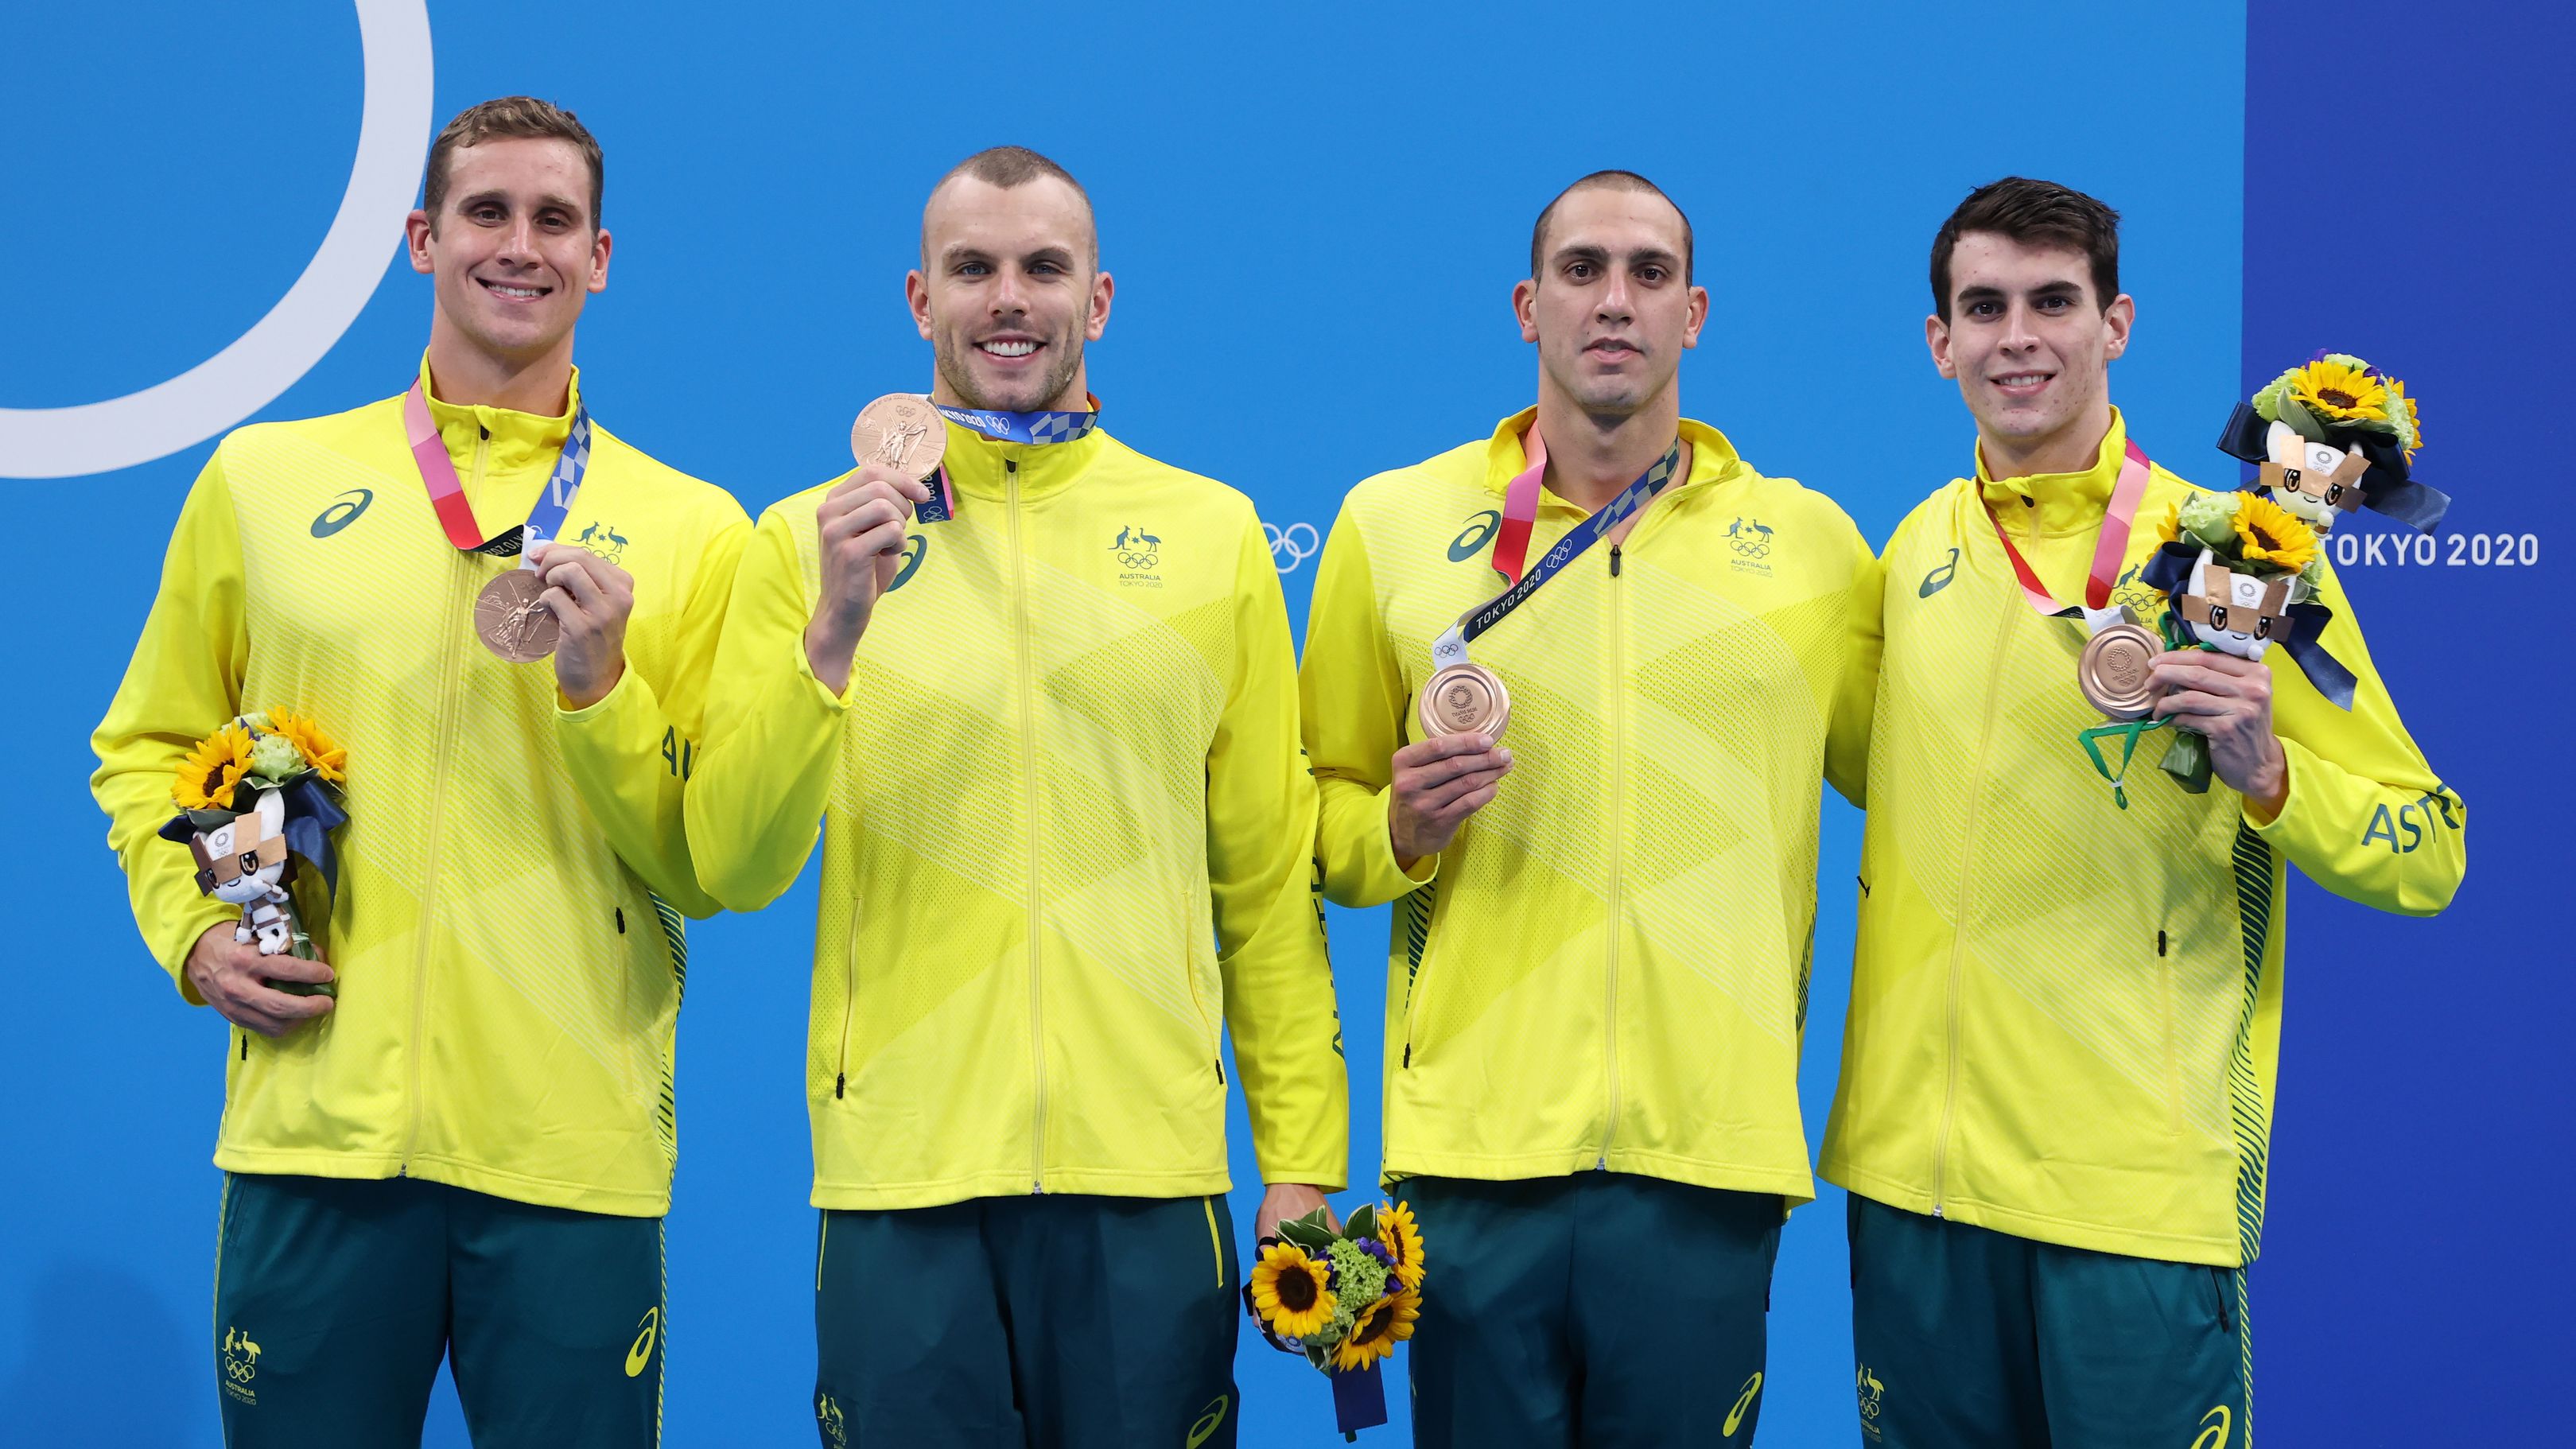 Aussies touched out of silver in thrilling relay